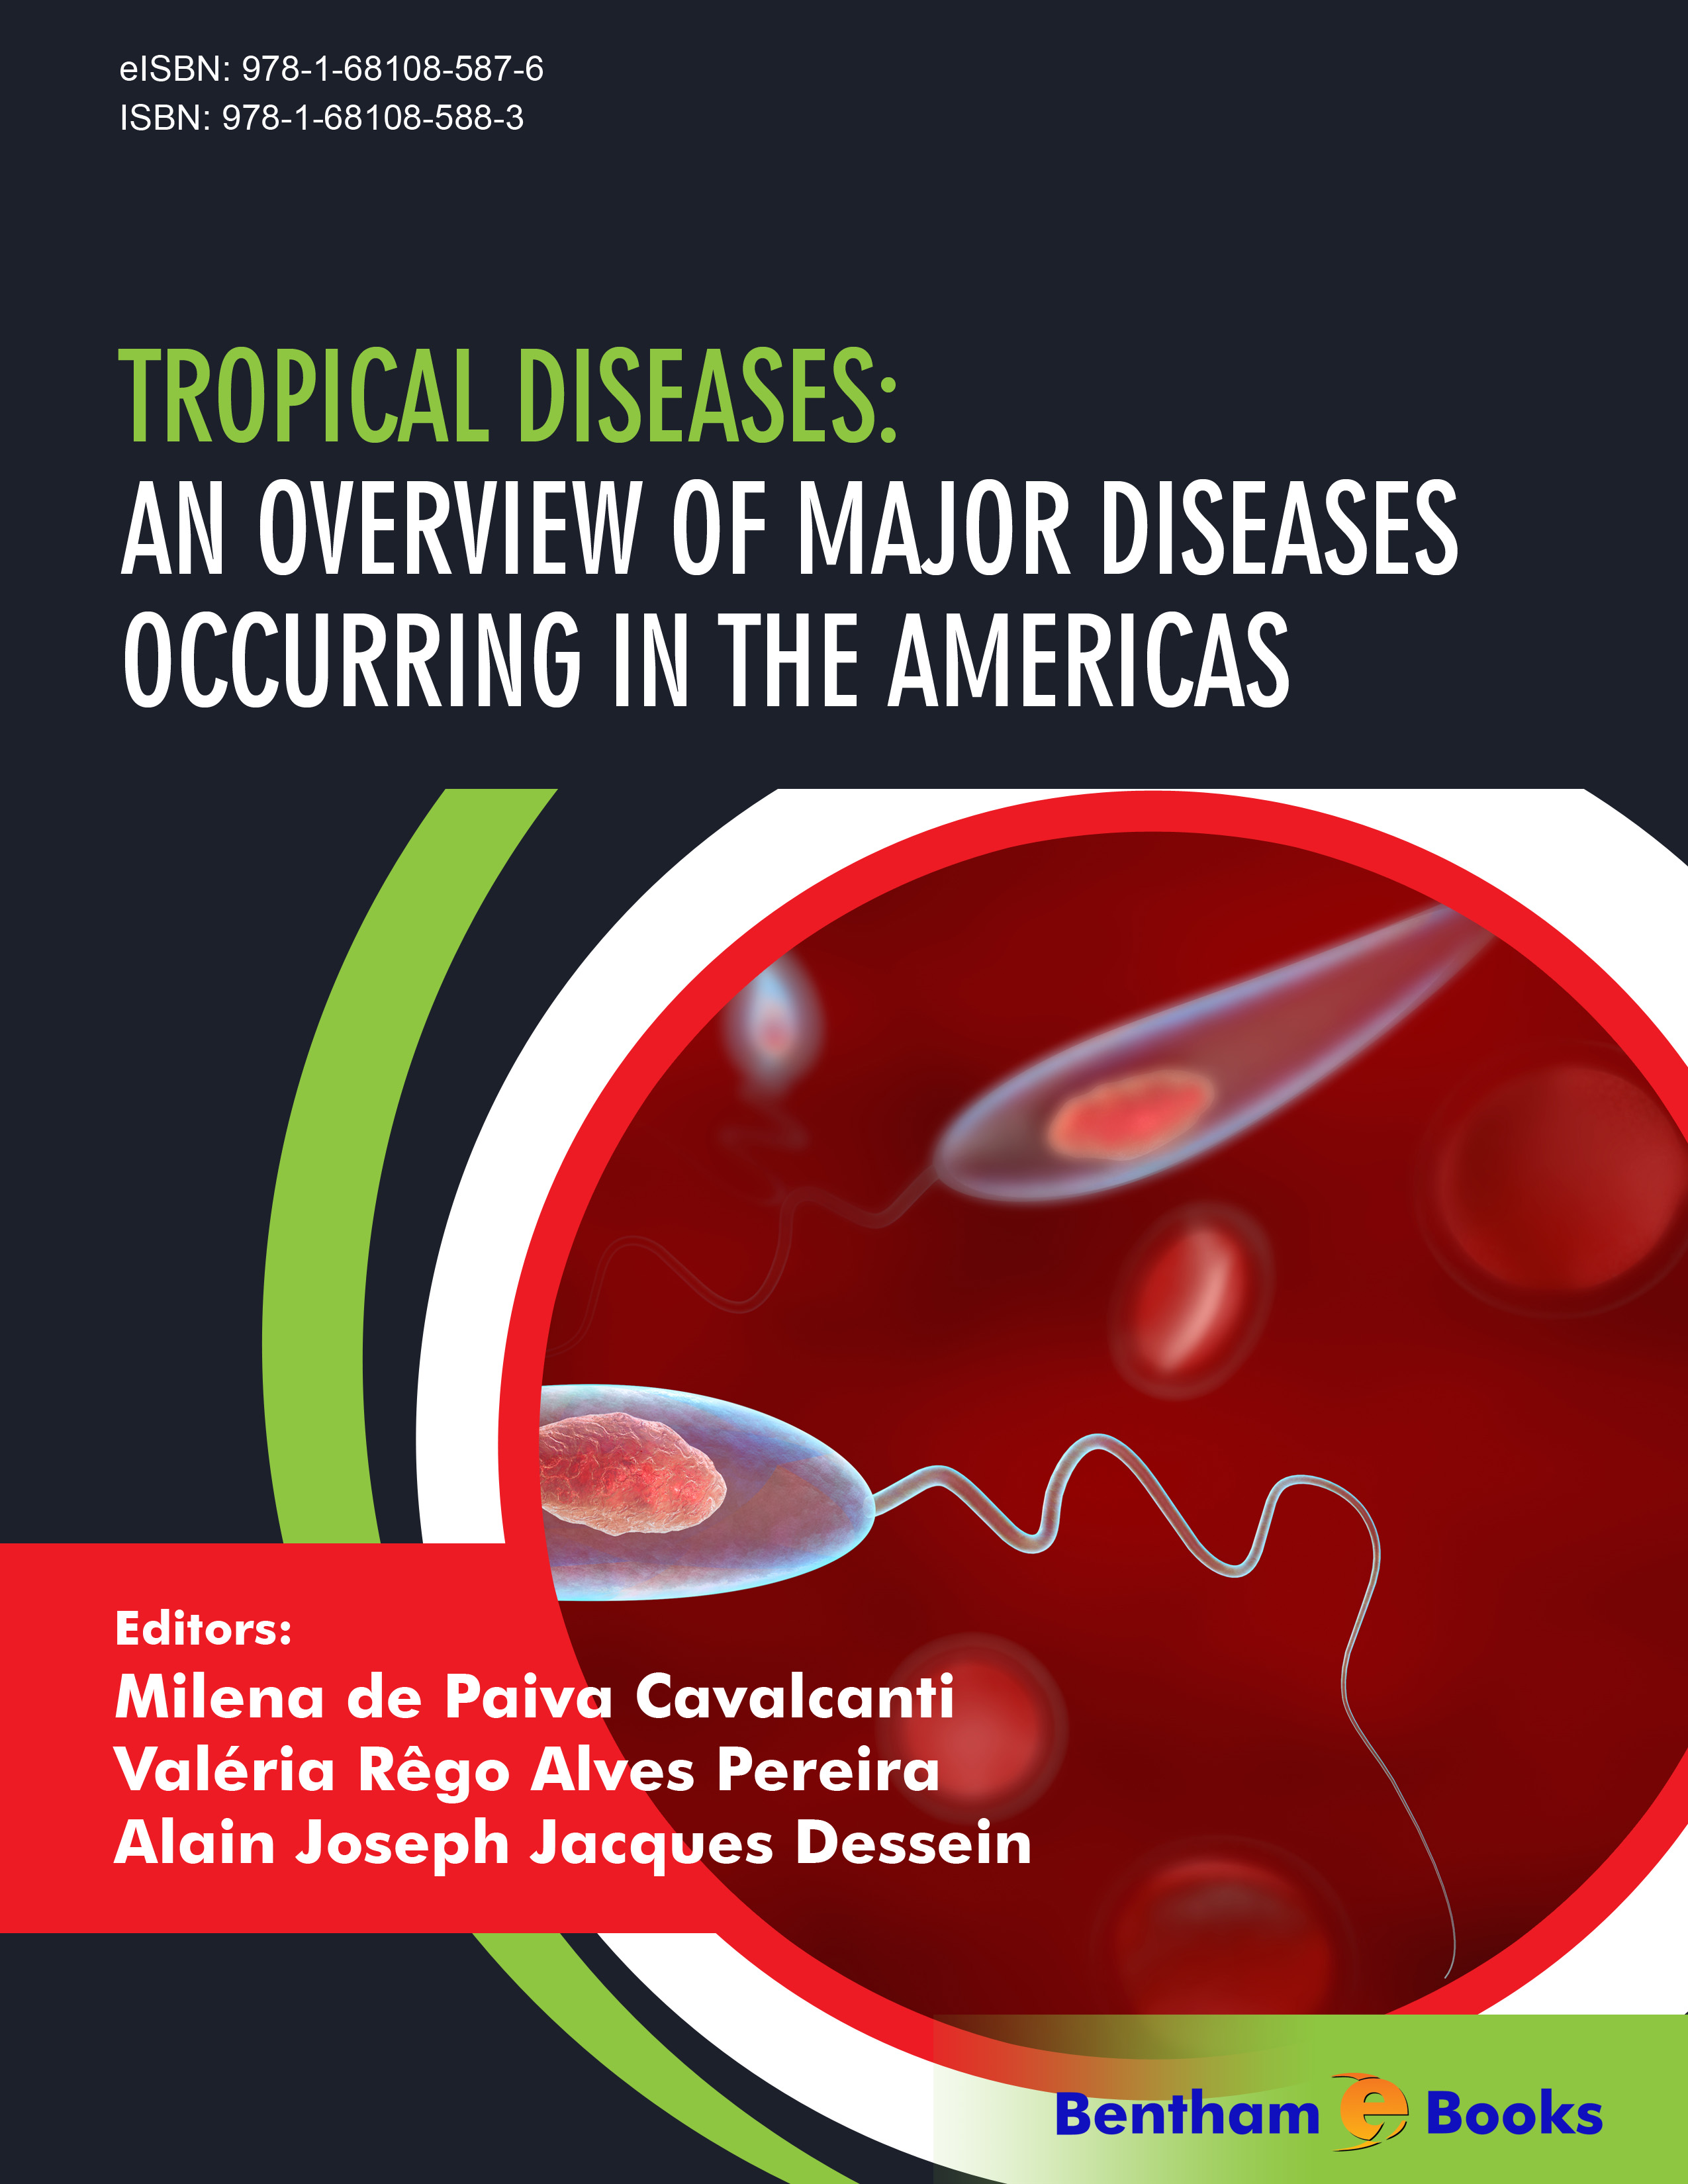 Tropical Diseases: An Overview of Major Diseases Occurring in the Americas